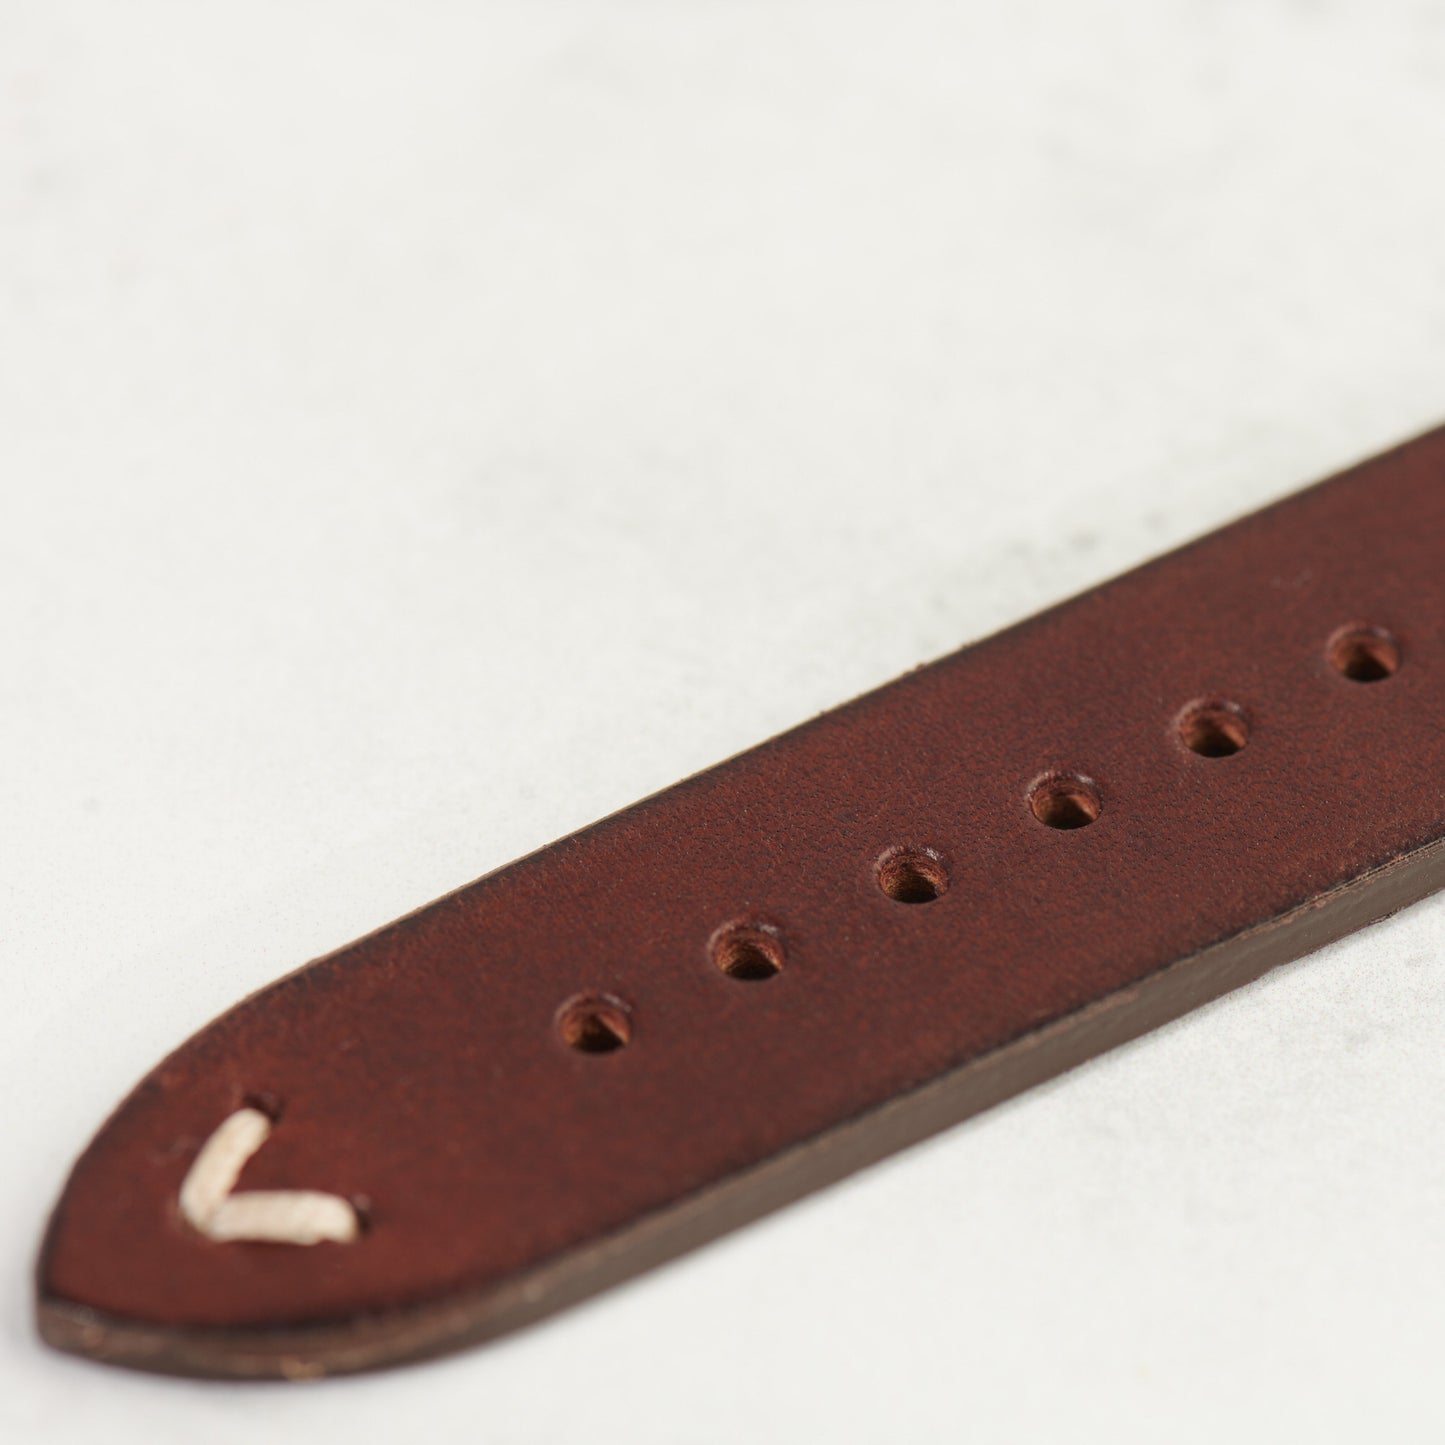 italian leather watch strap in vintage brown close up shot